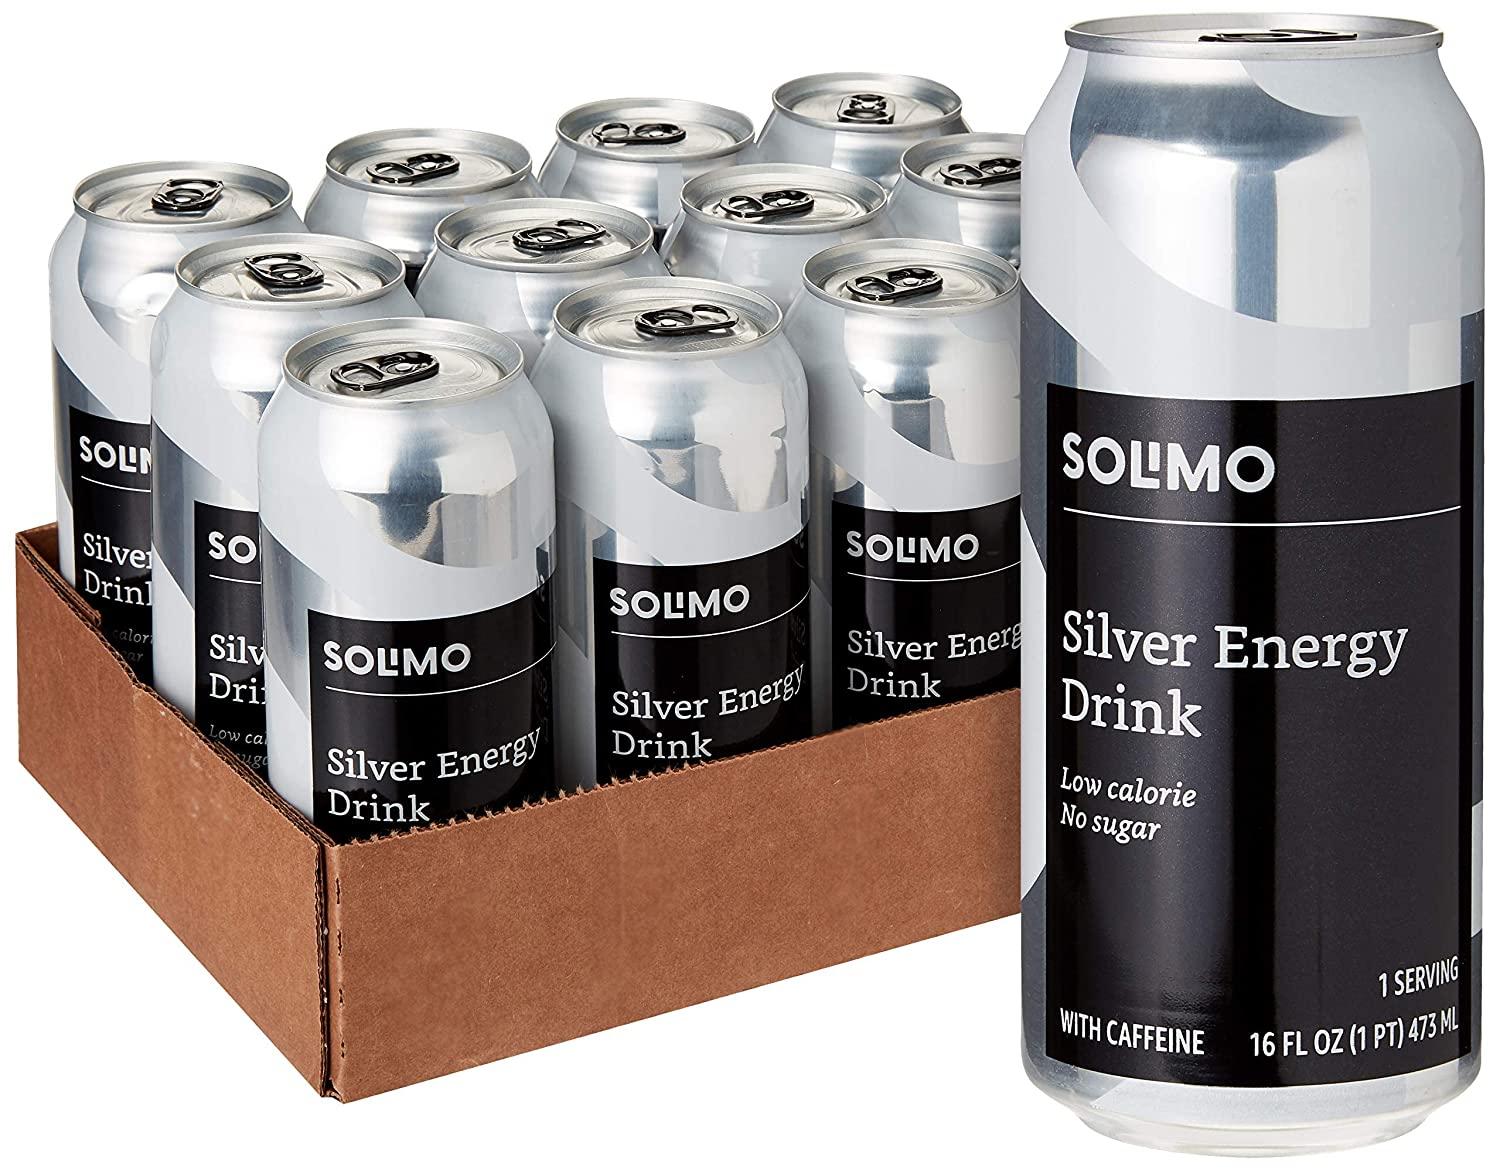 Amazon Brand Solimo Energy Drink 12 Pack for $11.16 Shipped